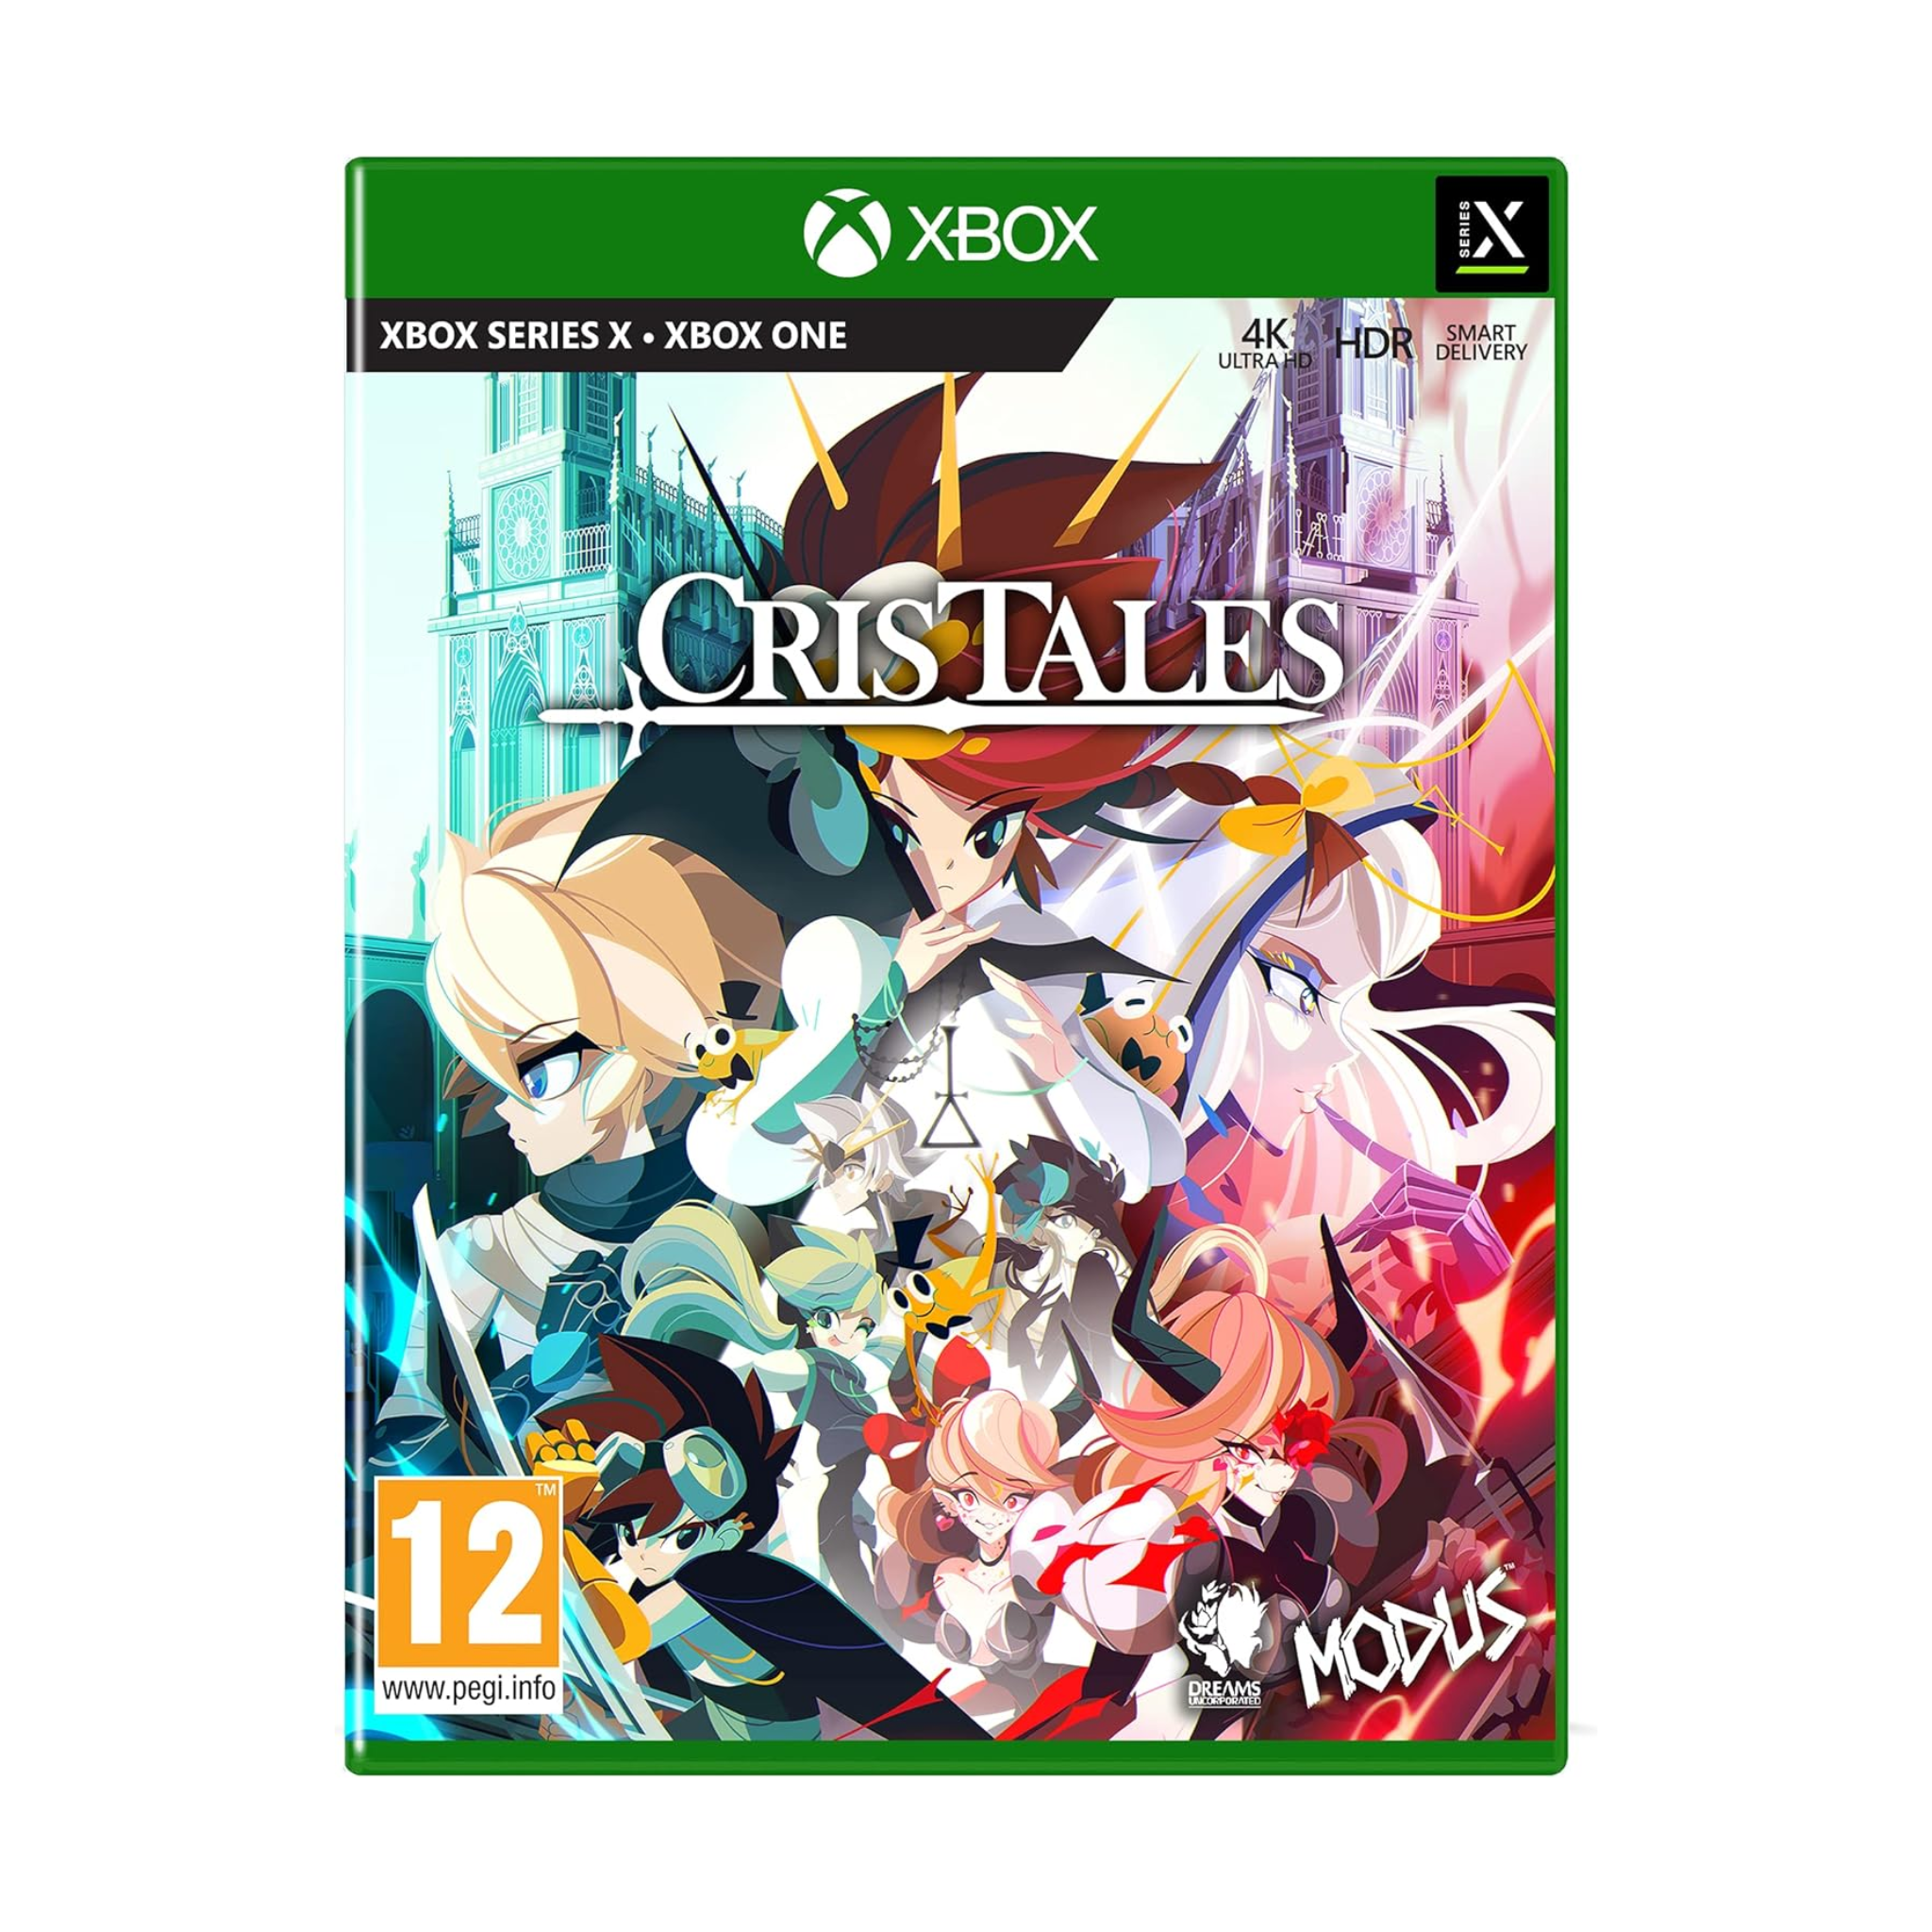 Image of Cris tales Video Game for Xbox series X / Xbox One